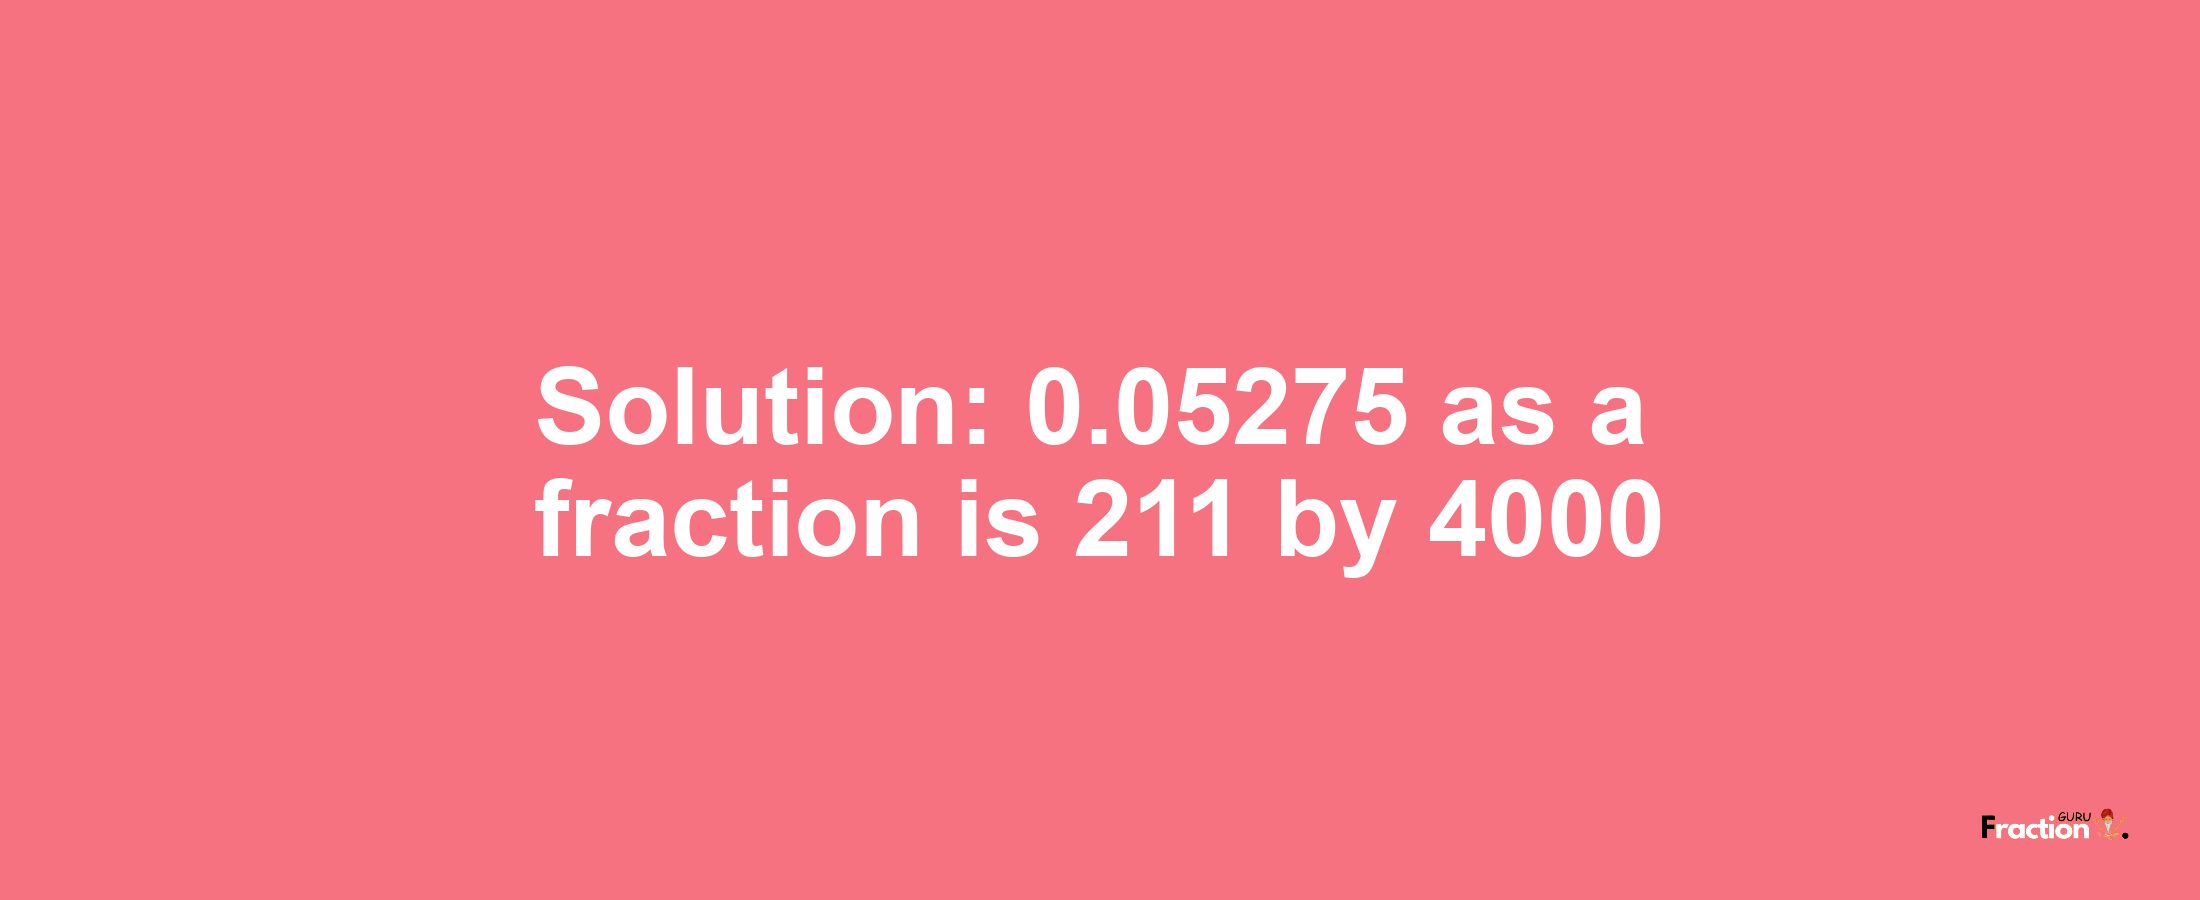 Solution:0.05275 as a fraction is 211/4000